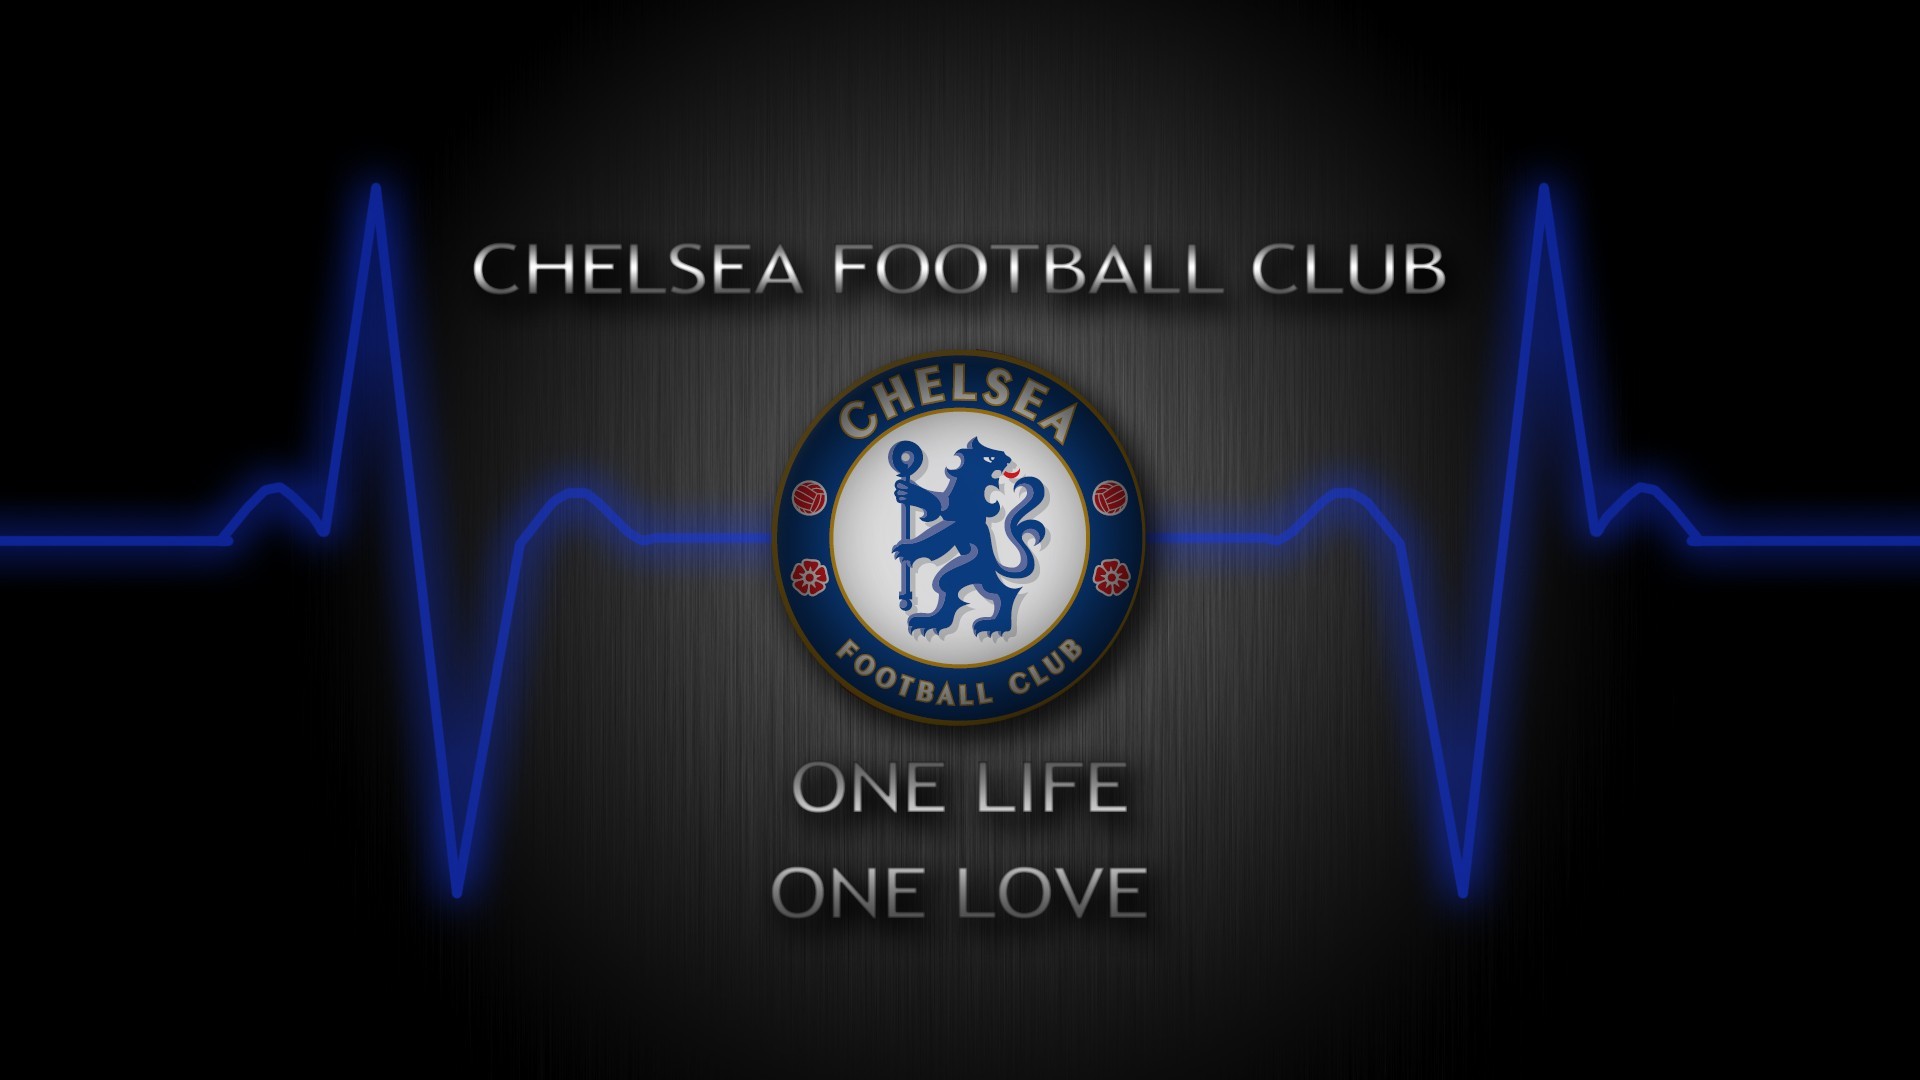 1920x1080 Chelsea Images wallpapers (74 Wallpapers)